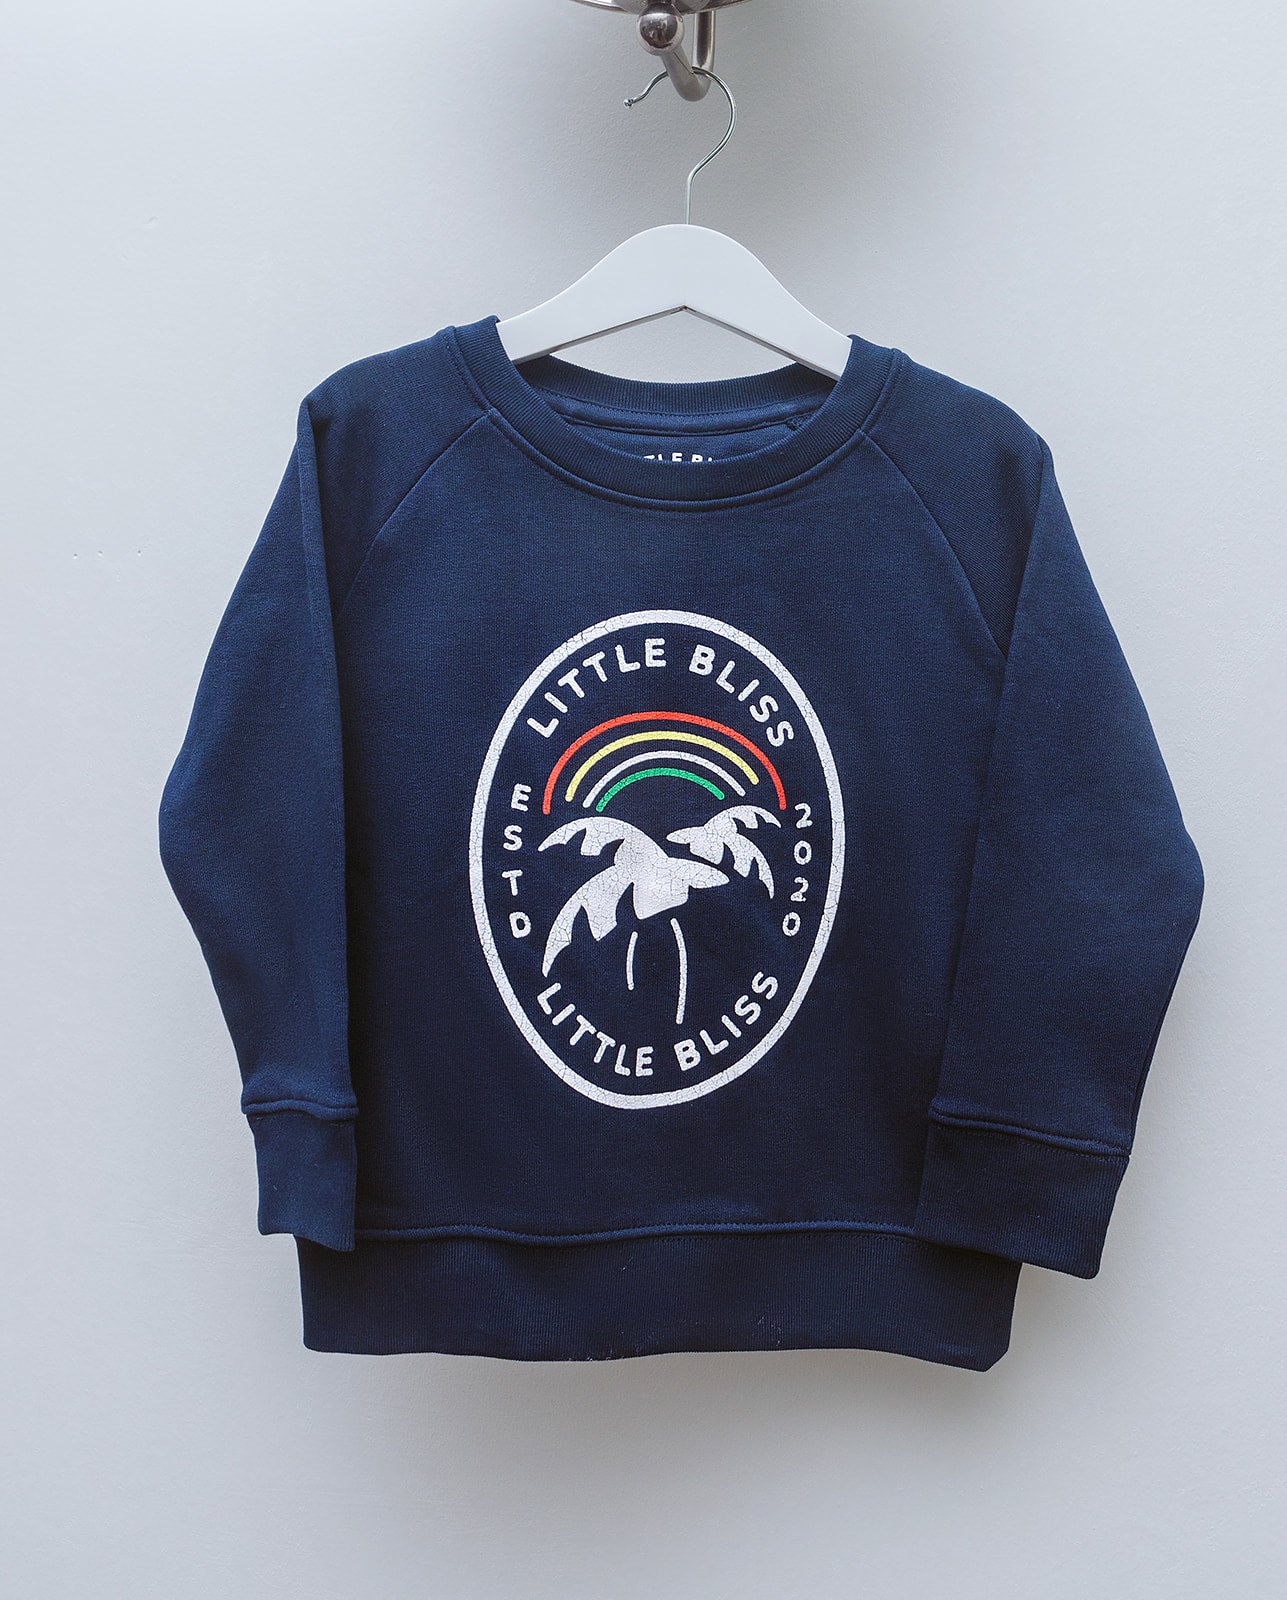 Little Bliss by Anna Daly's Kid's Varsity sweatshirt in navy